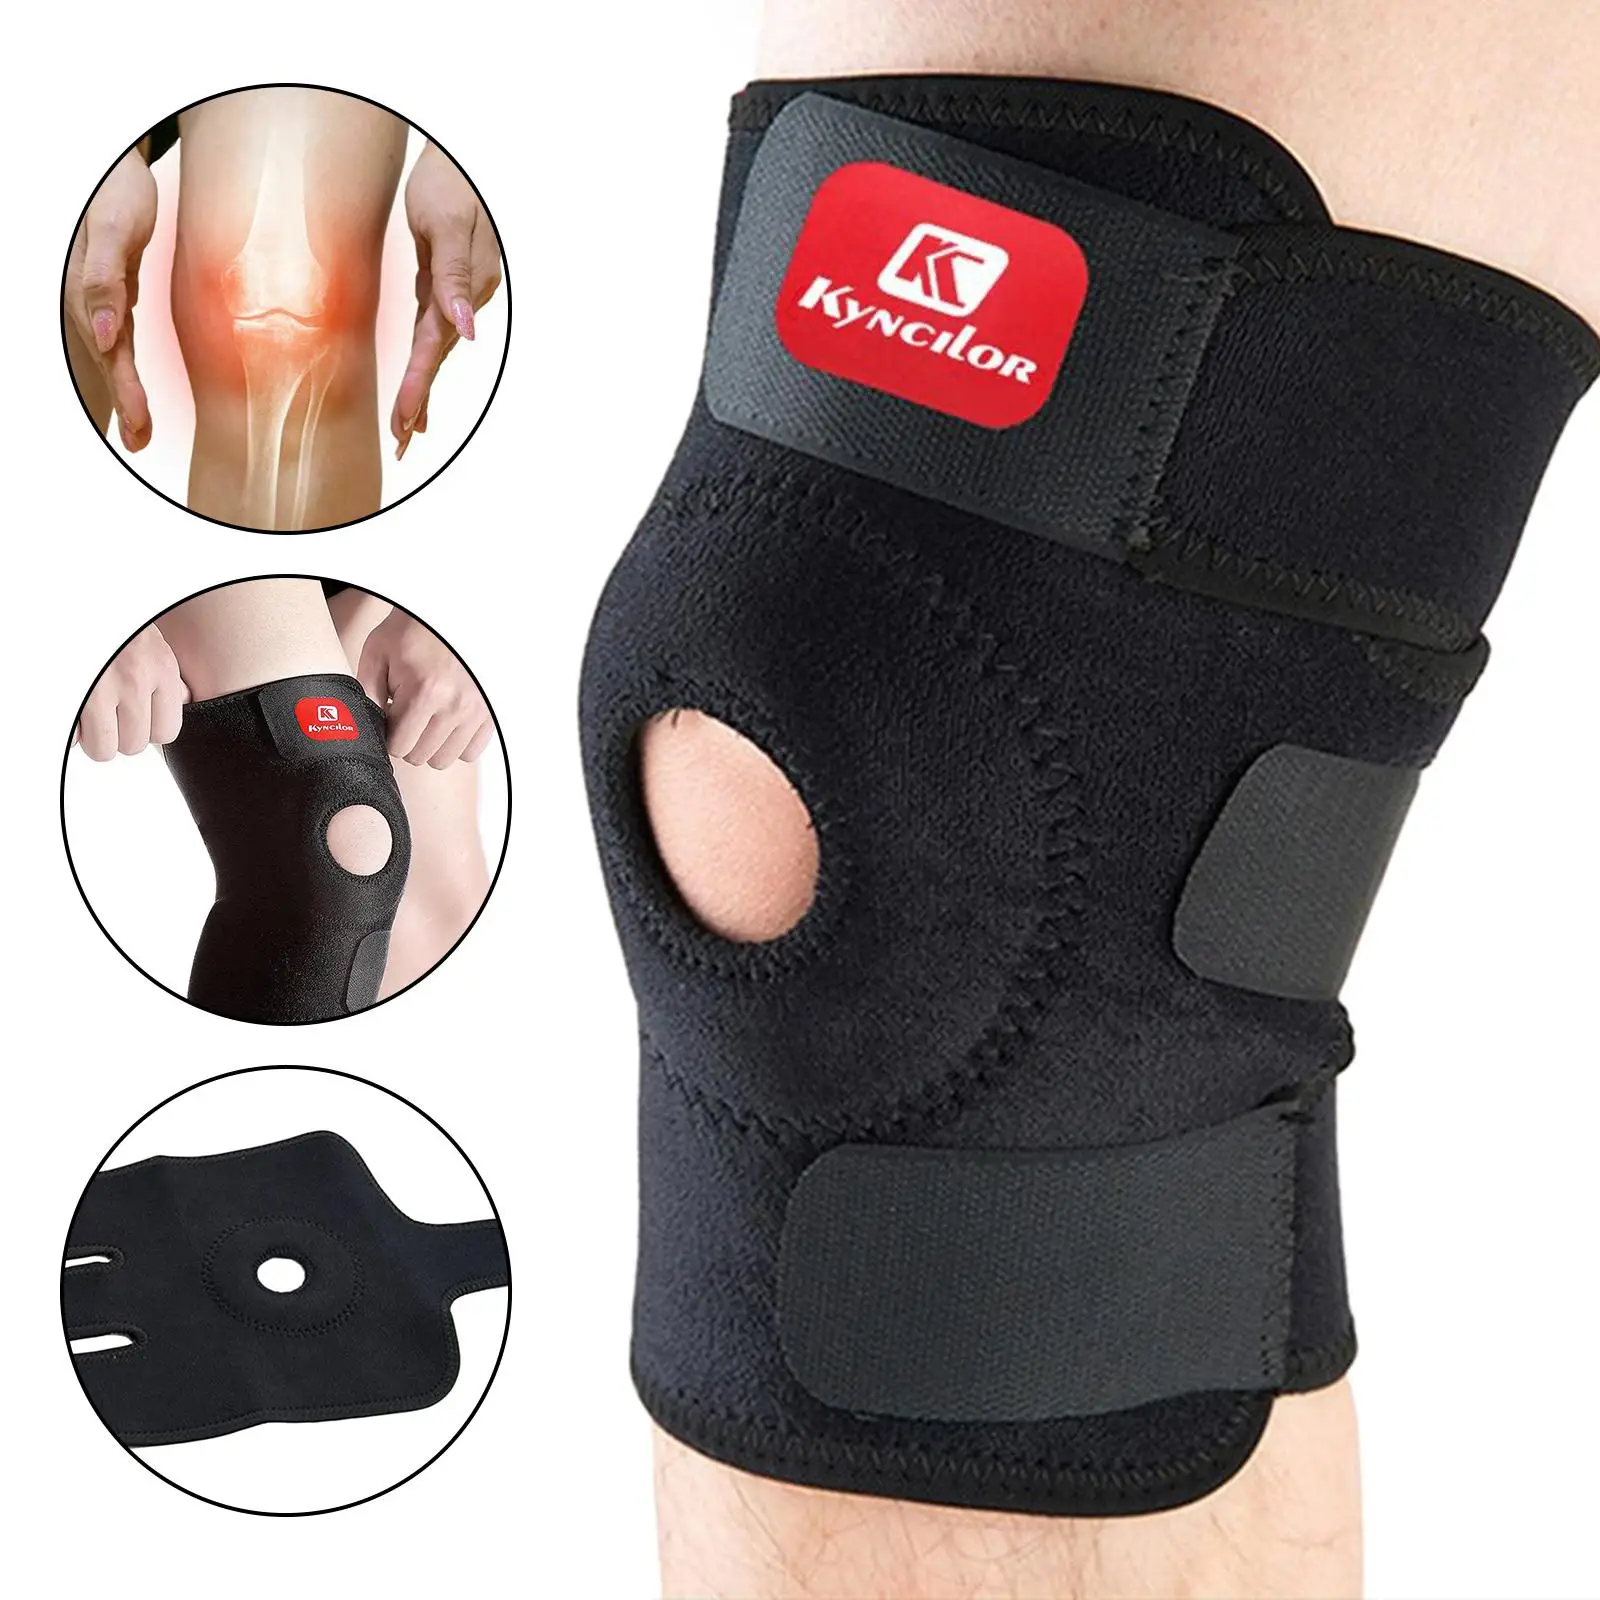 Adjustable Compression Knee Support   Pain, Injury , Running, Workout